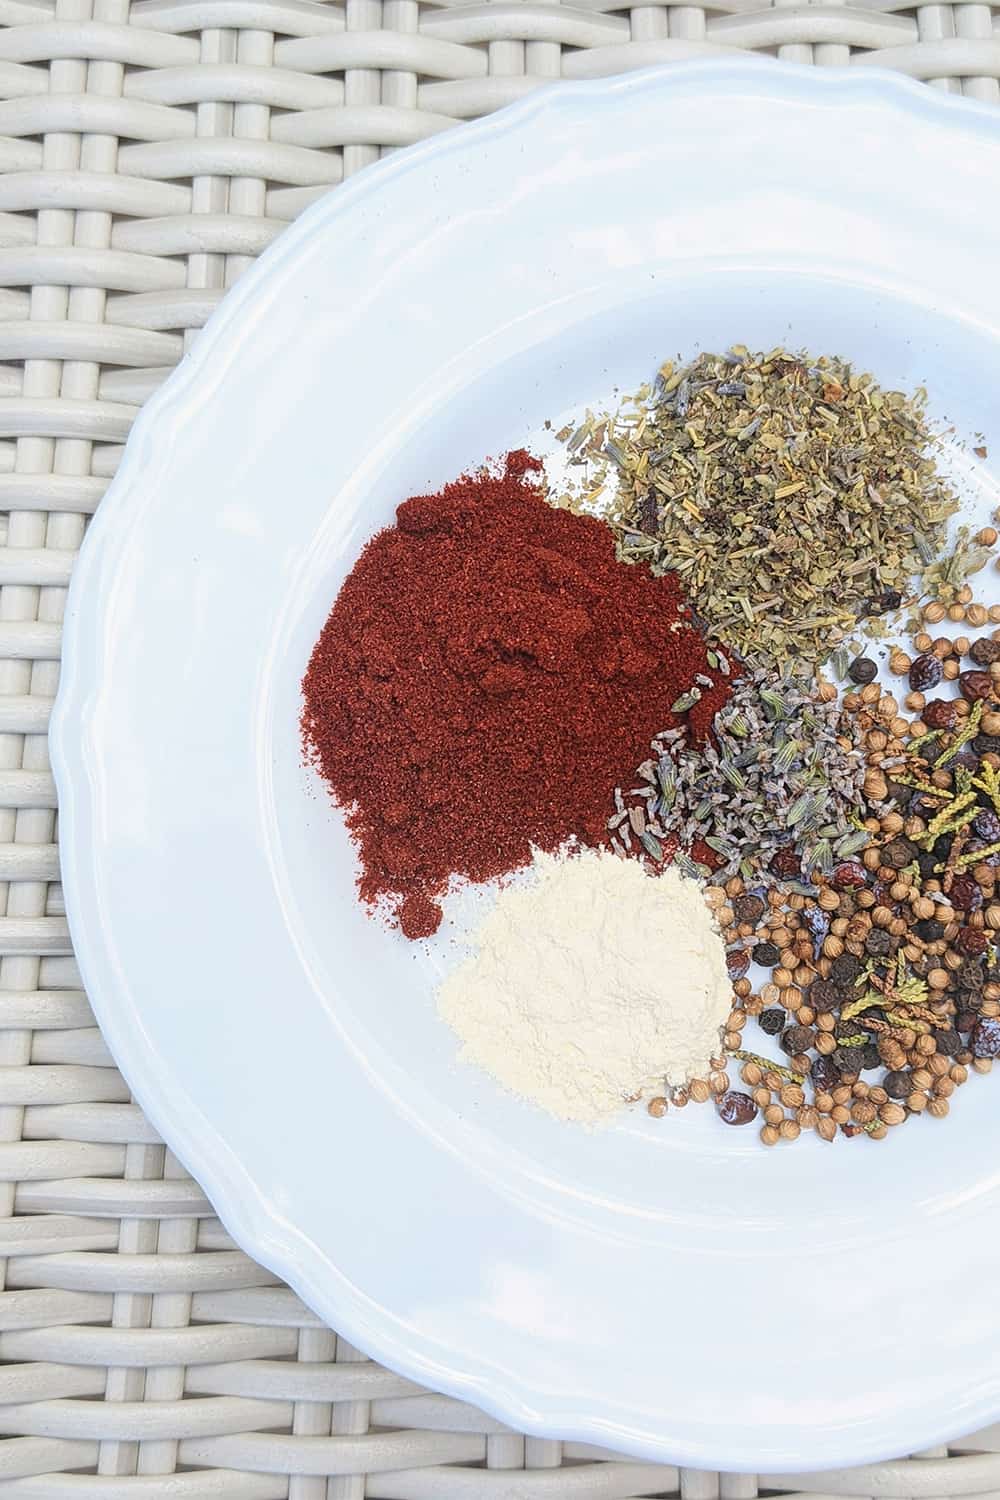 ingredients prepped on a plate including peppercorn, red chile powder, and more